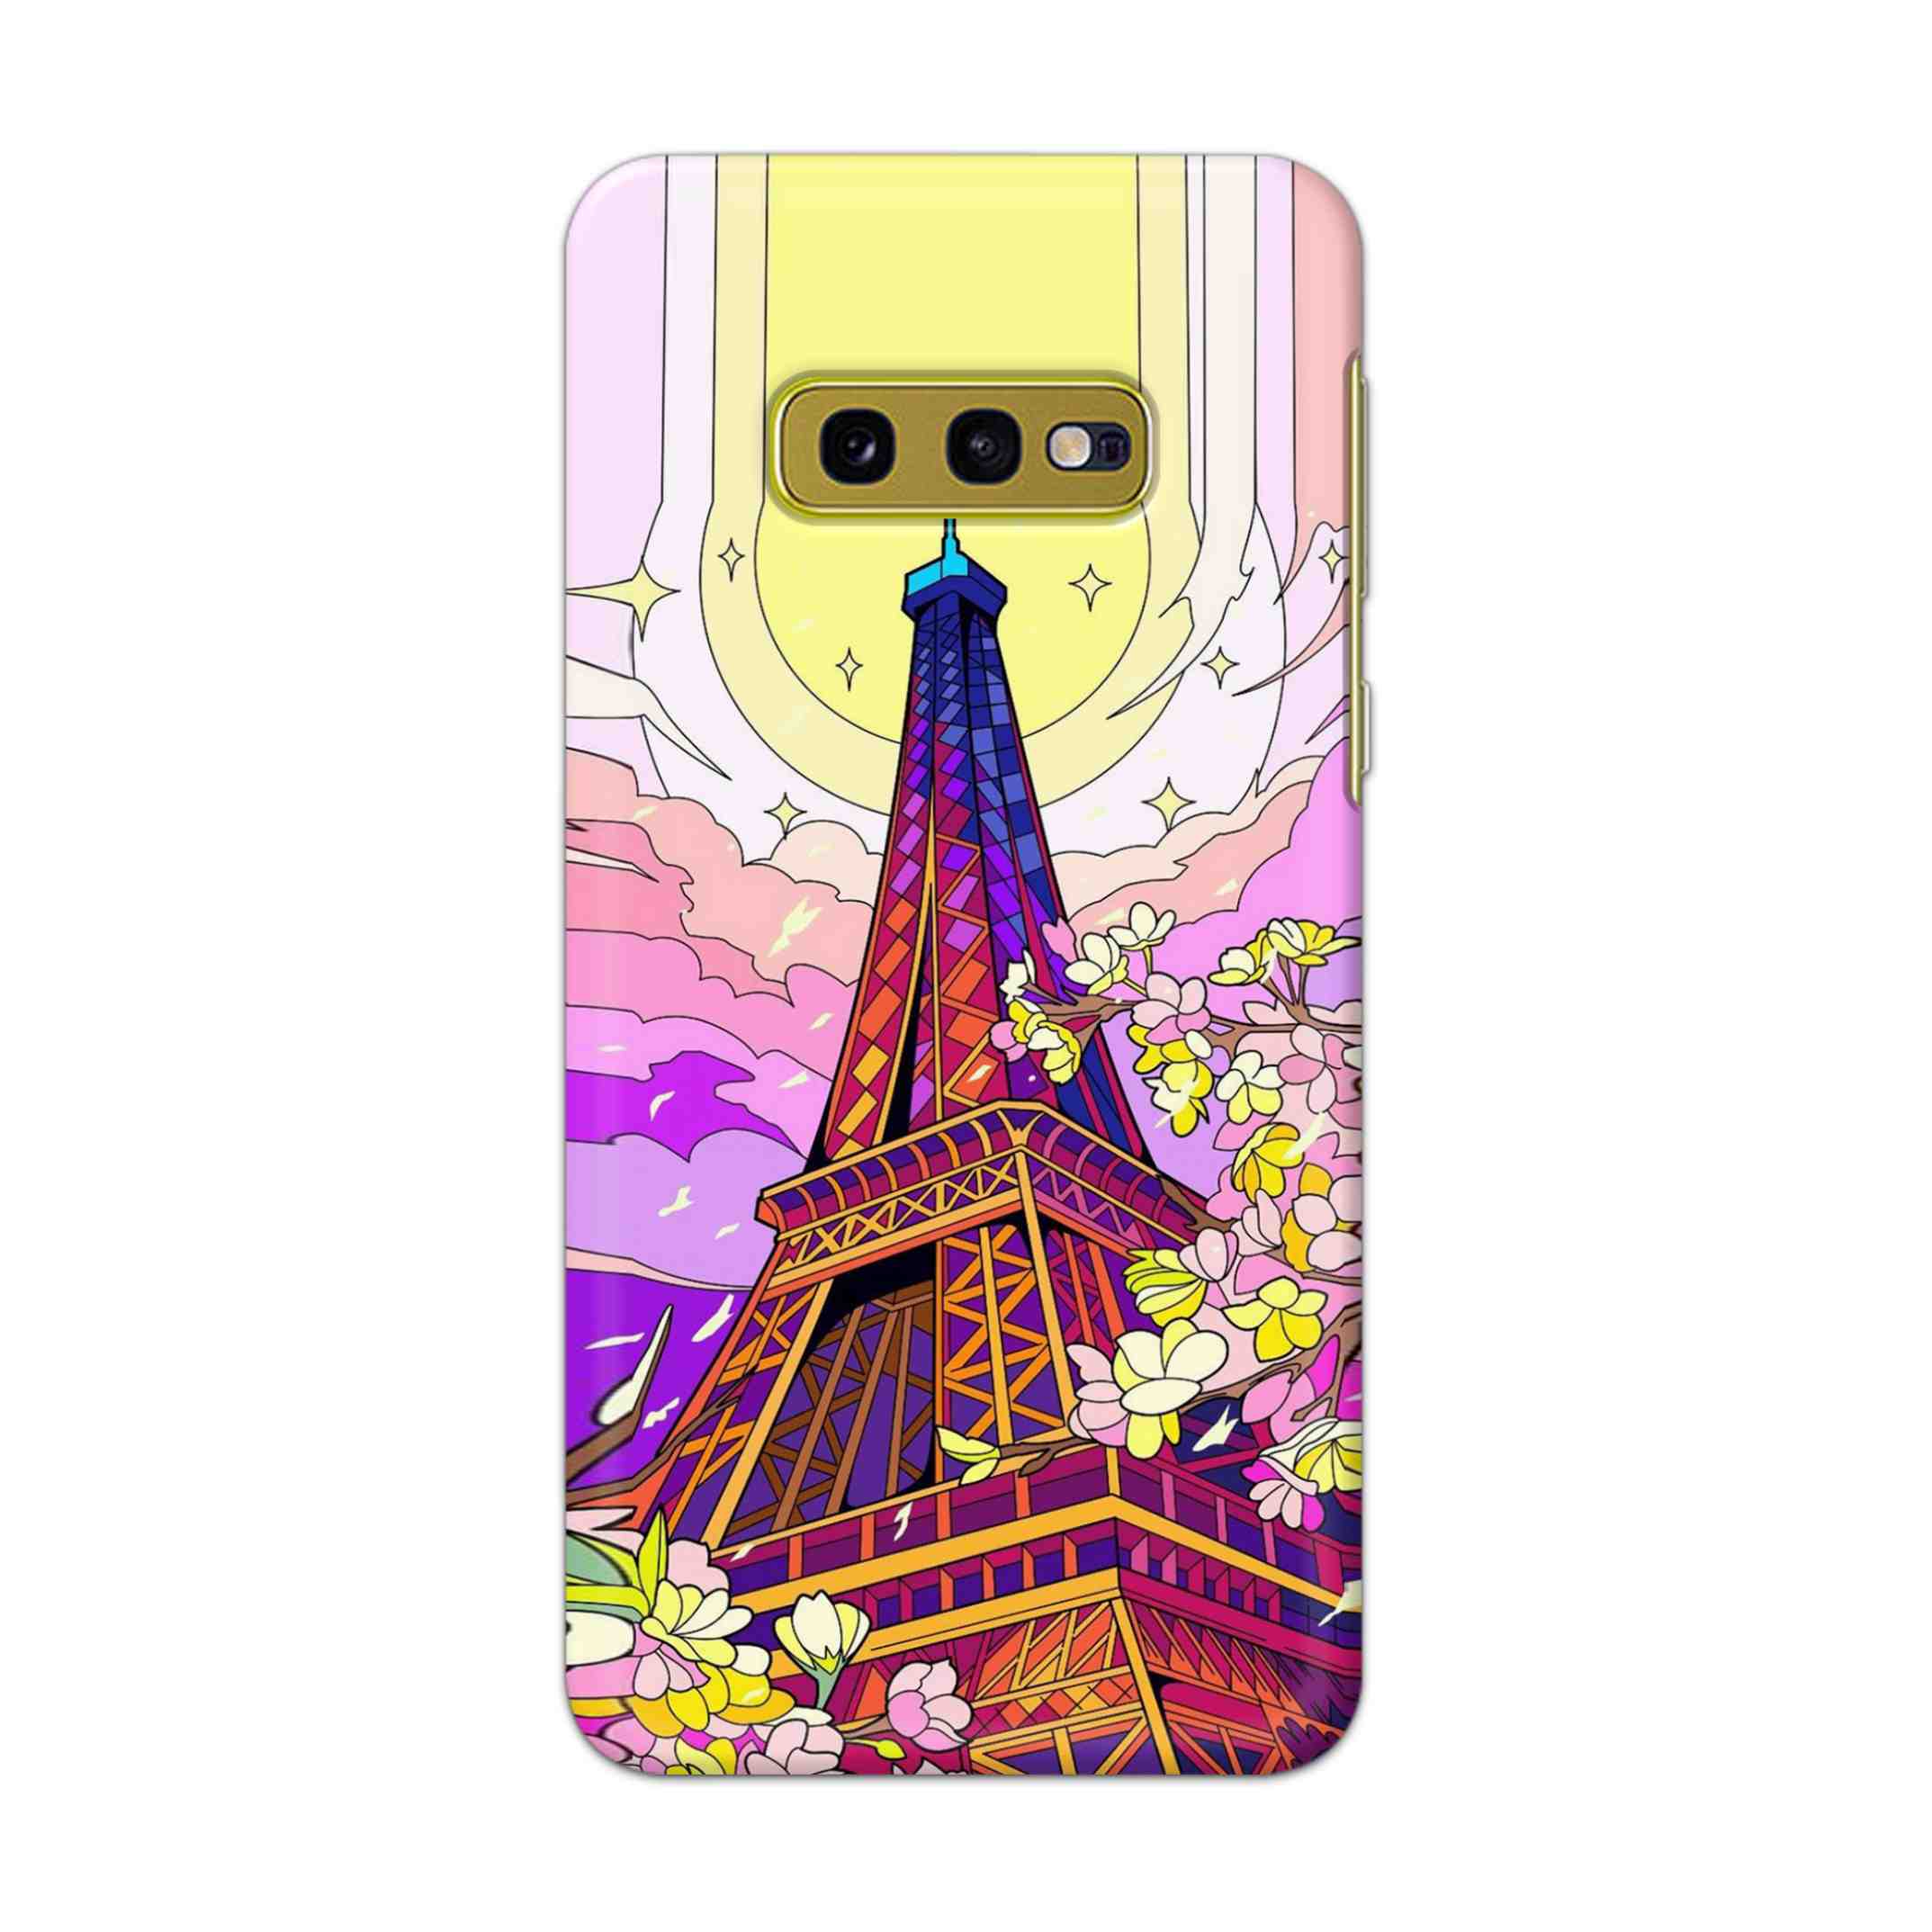 Buy Eiffel Tower Hard Back Mobile Phone Case Cover For Samsung Galaxy S10e Online